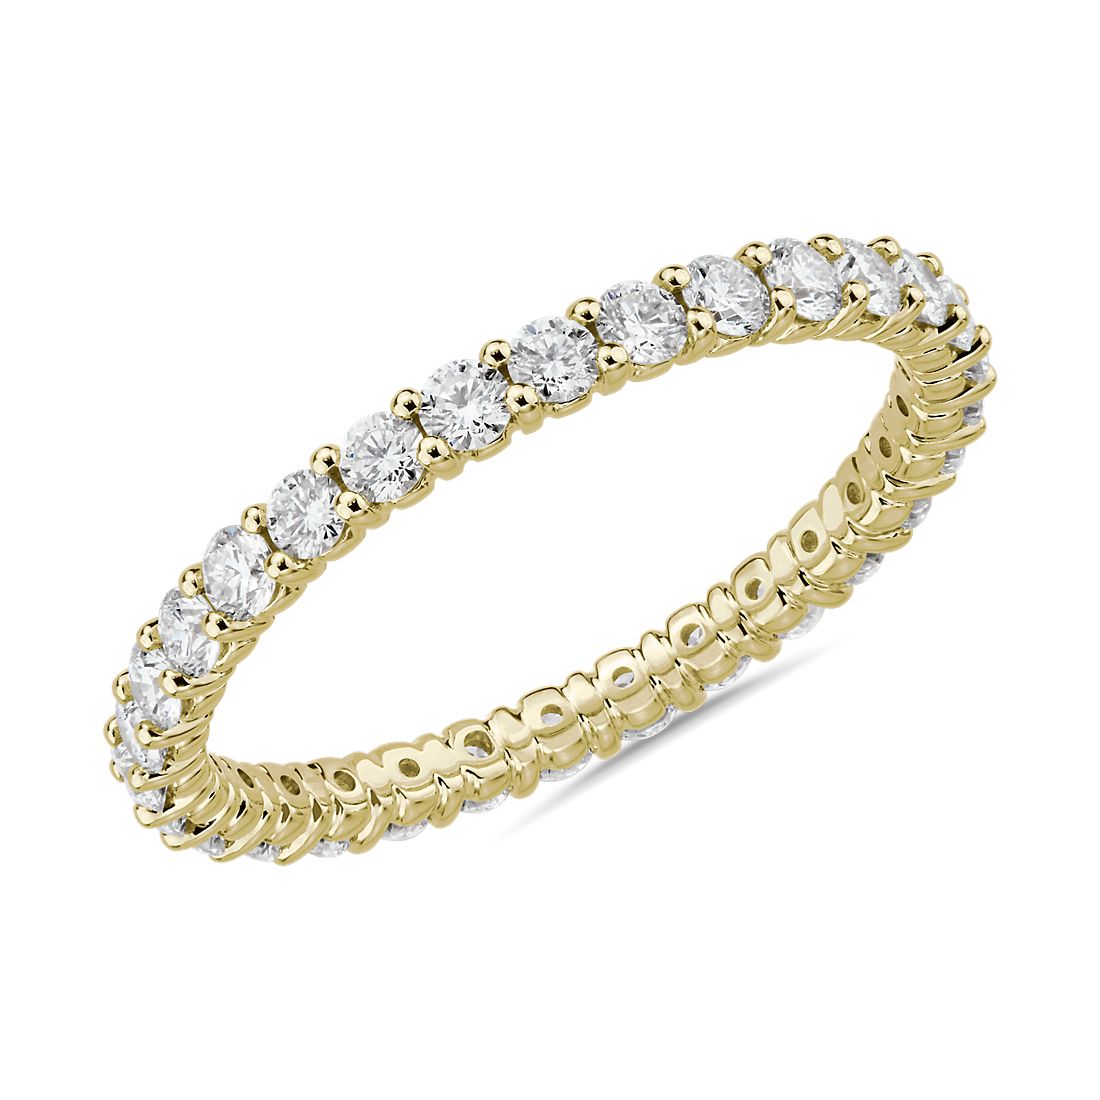 Comfort Fit Round Brilliant Diamond Eternity Ring in 18k Yellow Gold (1 ct. tw.)